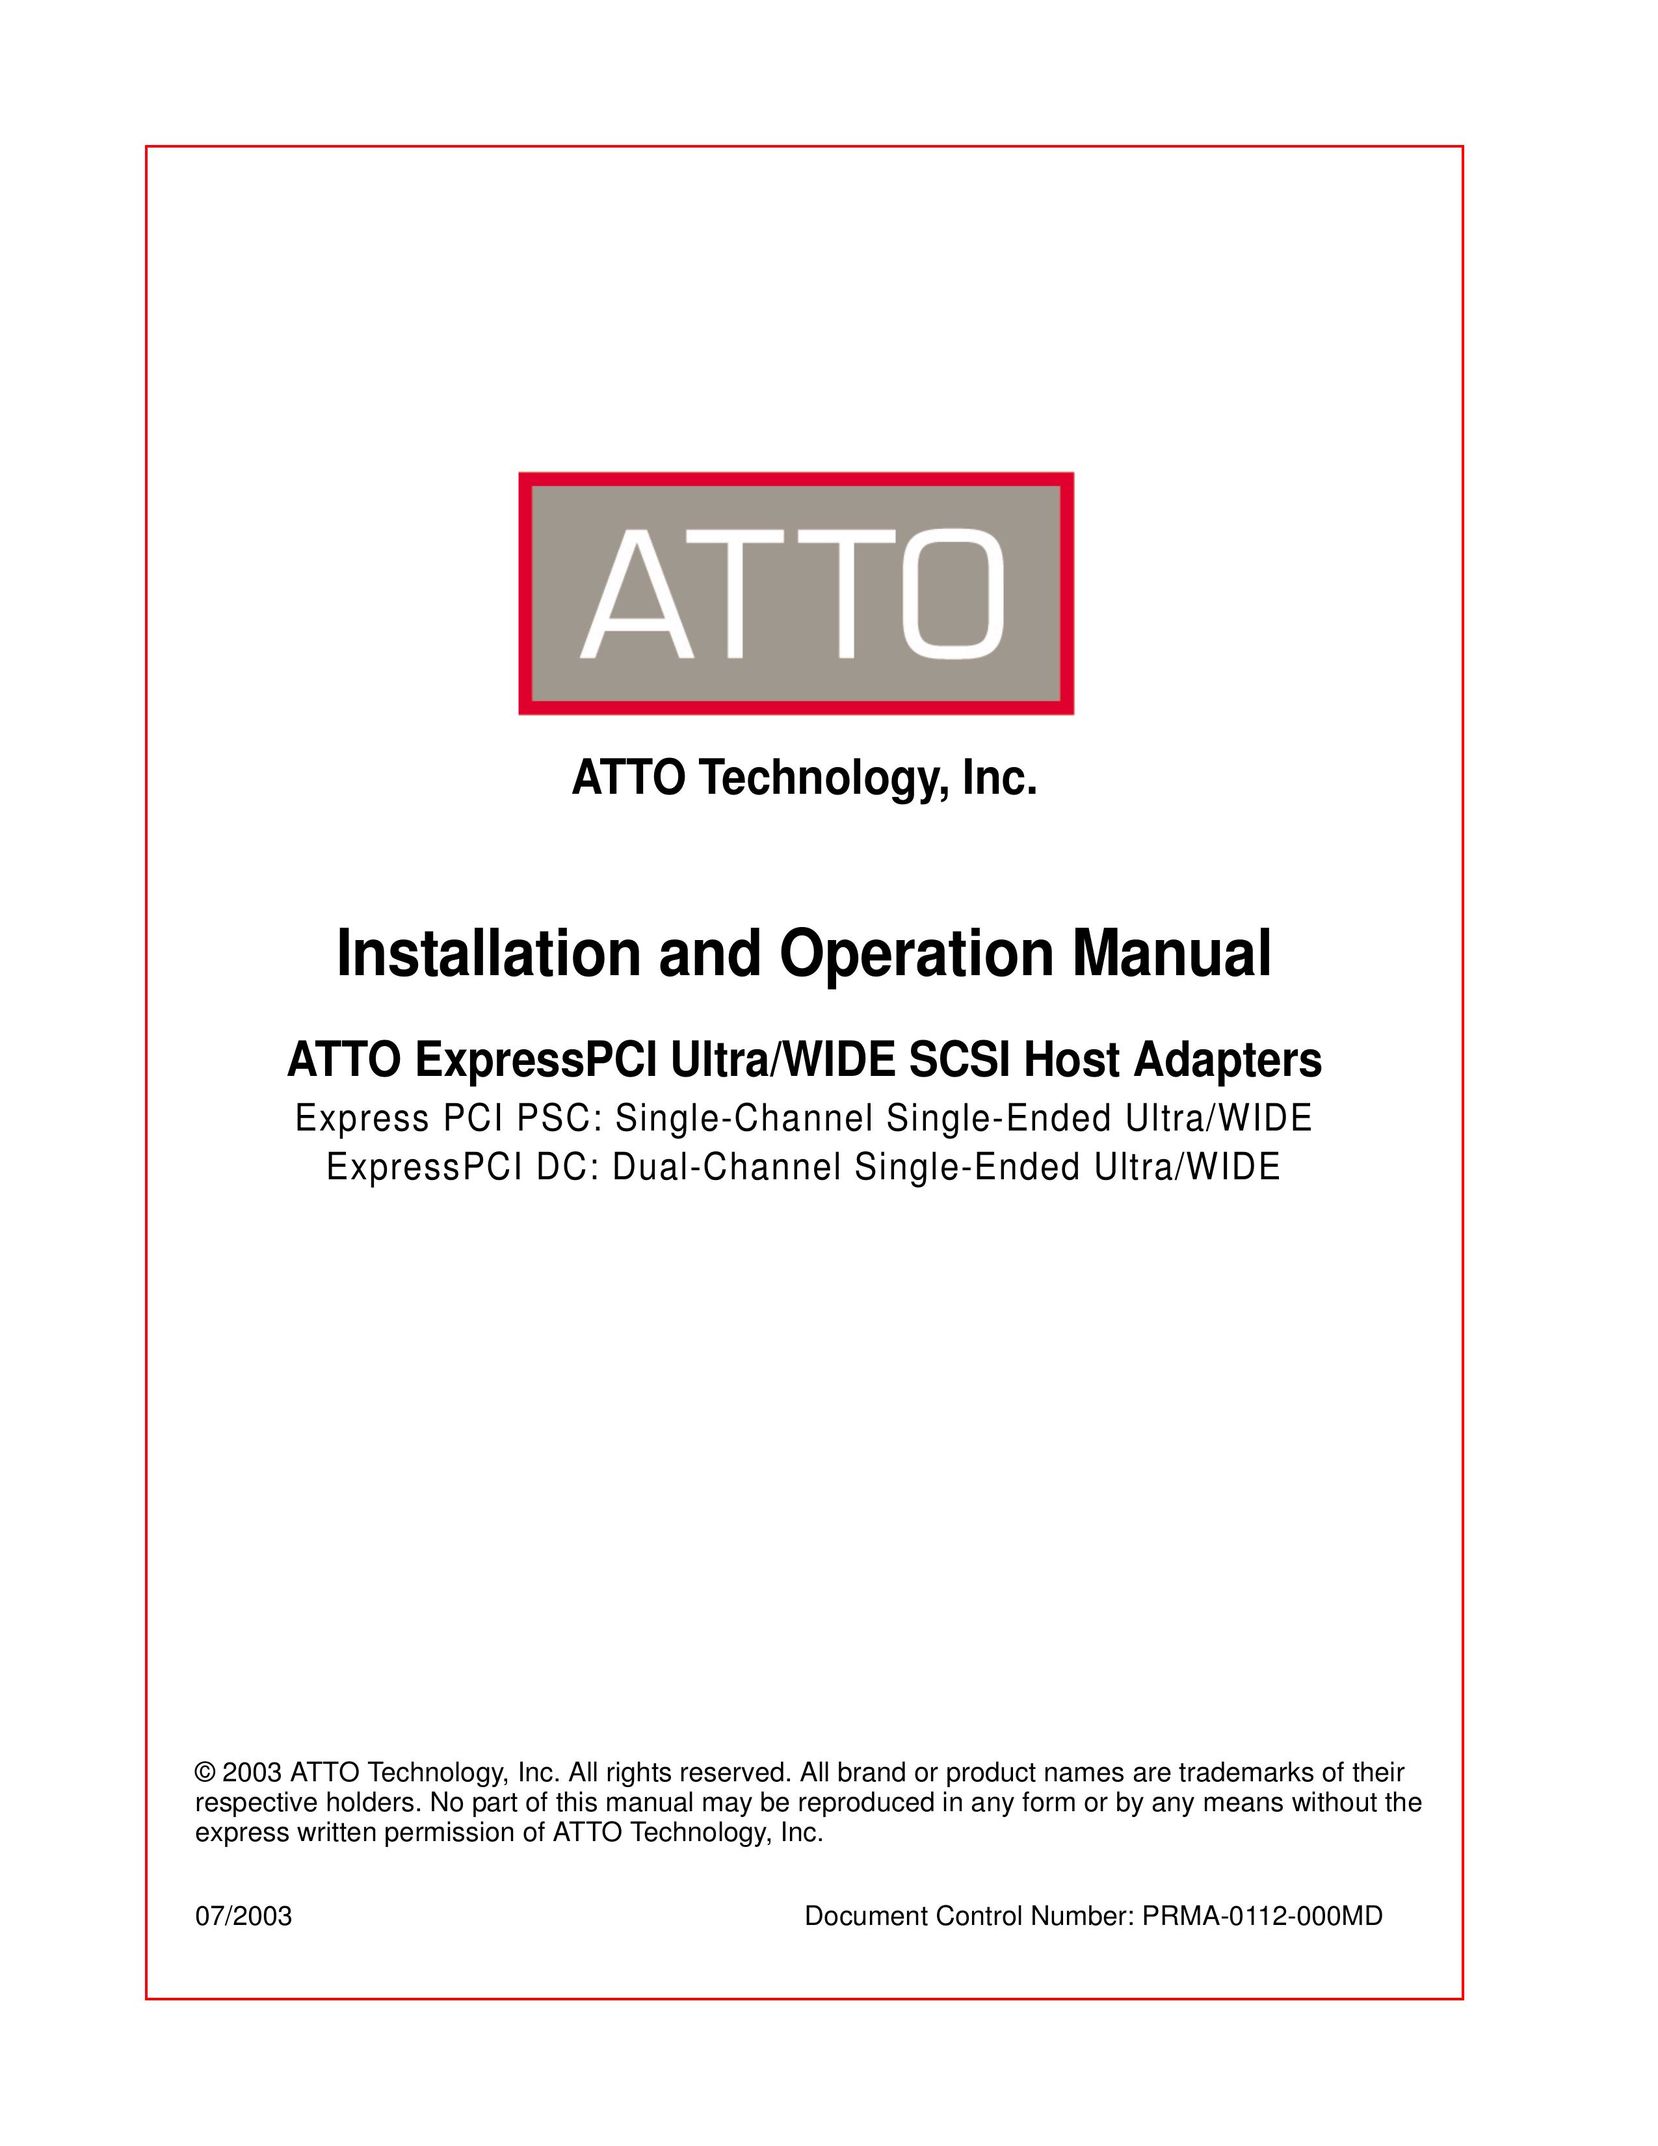 ATTO Technology ATTO ExpressPCI Ultra/WIDE SCSI Host Adapters Express PCI PSC: Single-Channel Single-Ended Ultra/WIDE ExpressPCI DC: Dual-Channel Single-Ended Ultra/WIDE Network Card User Manual